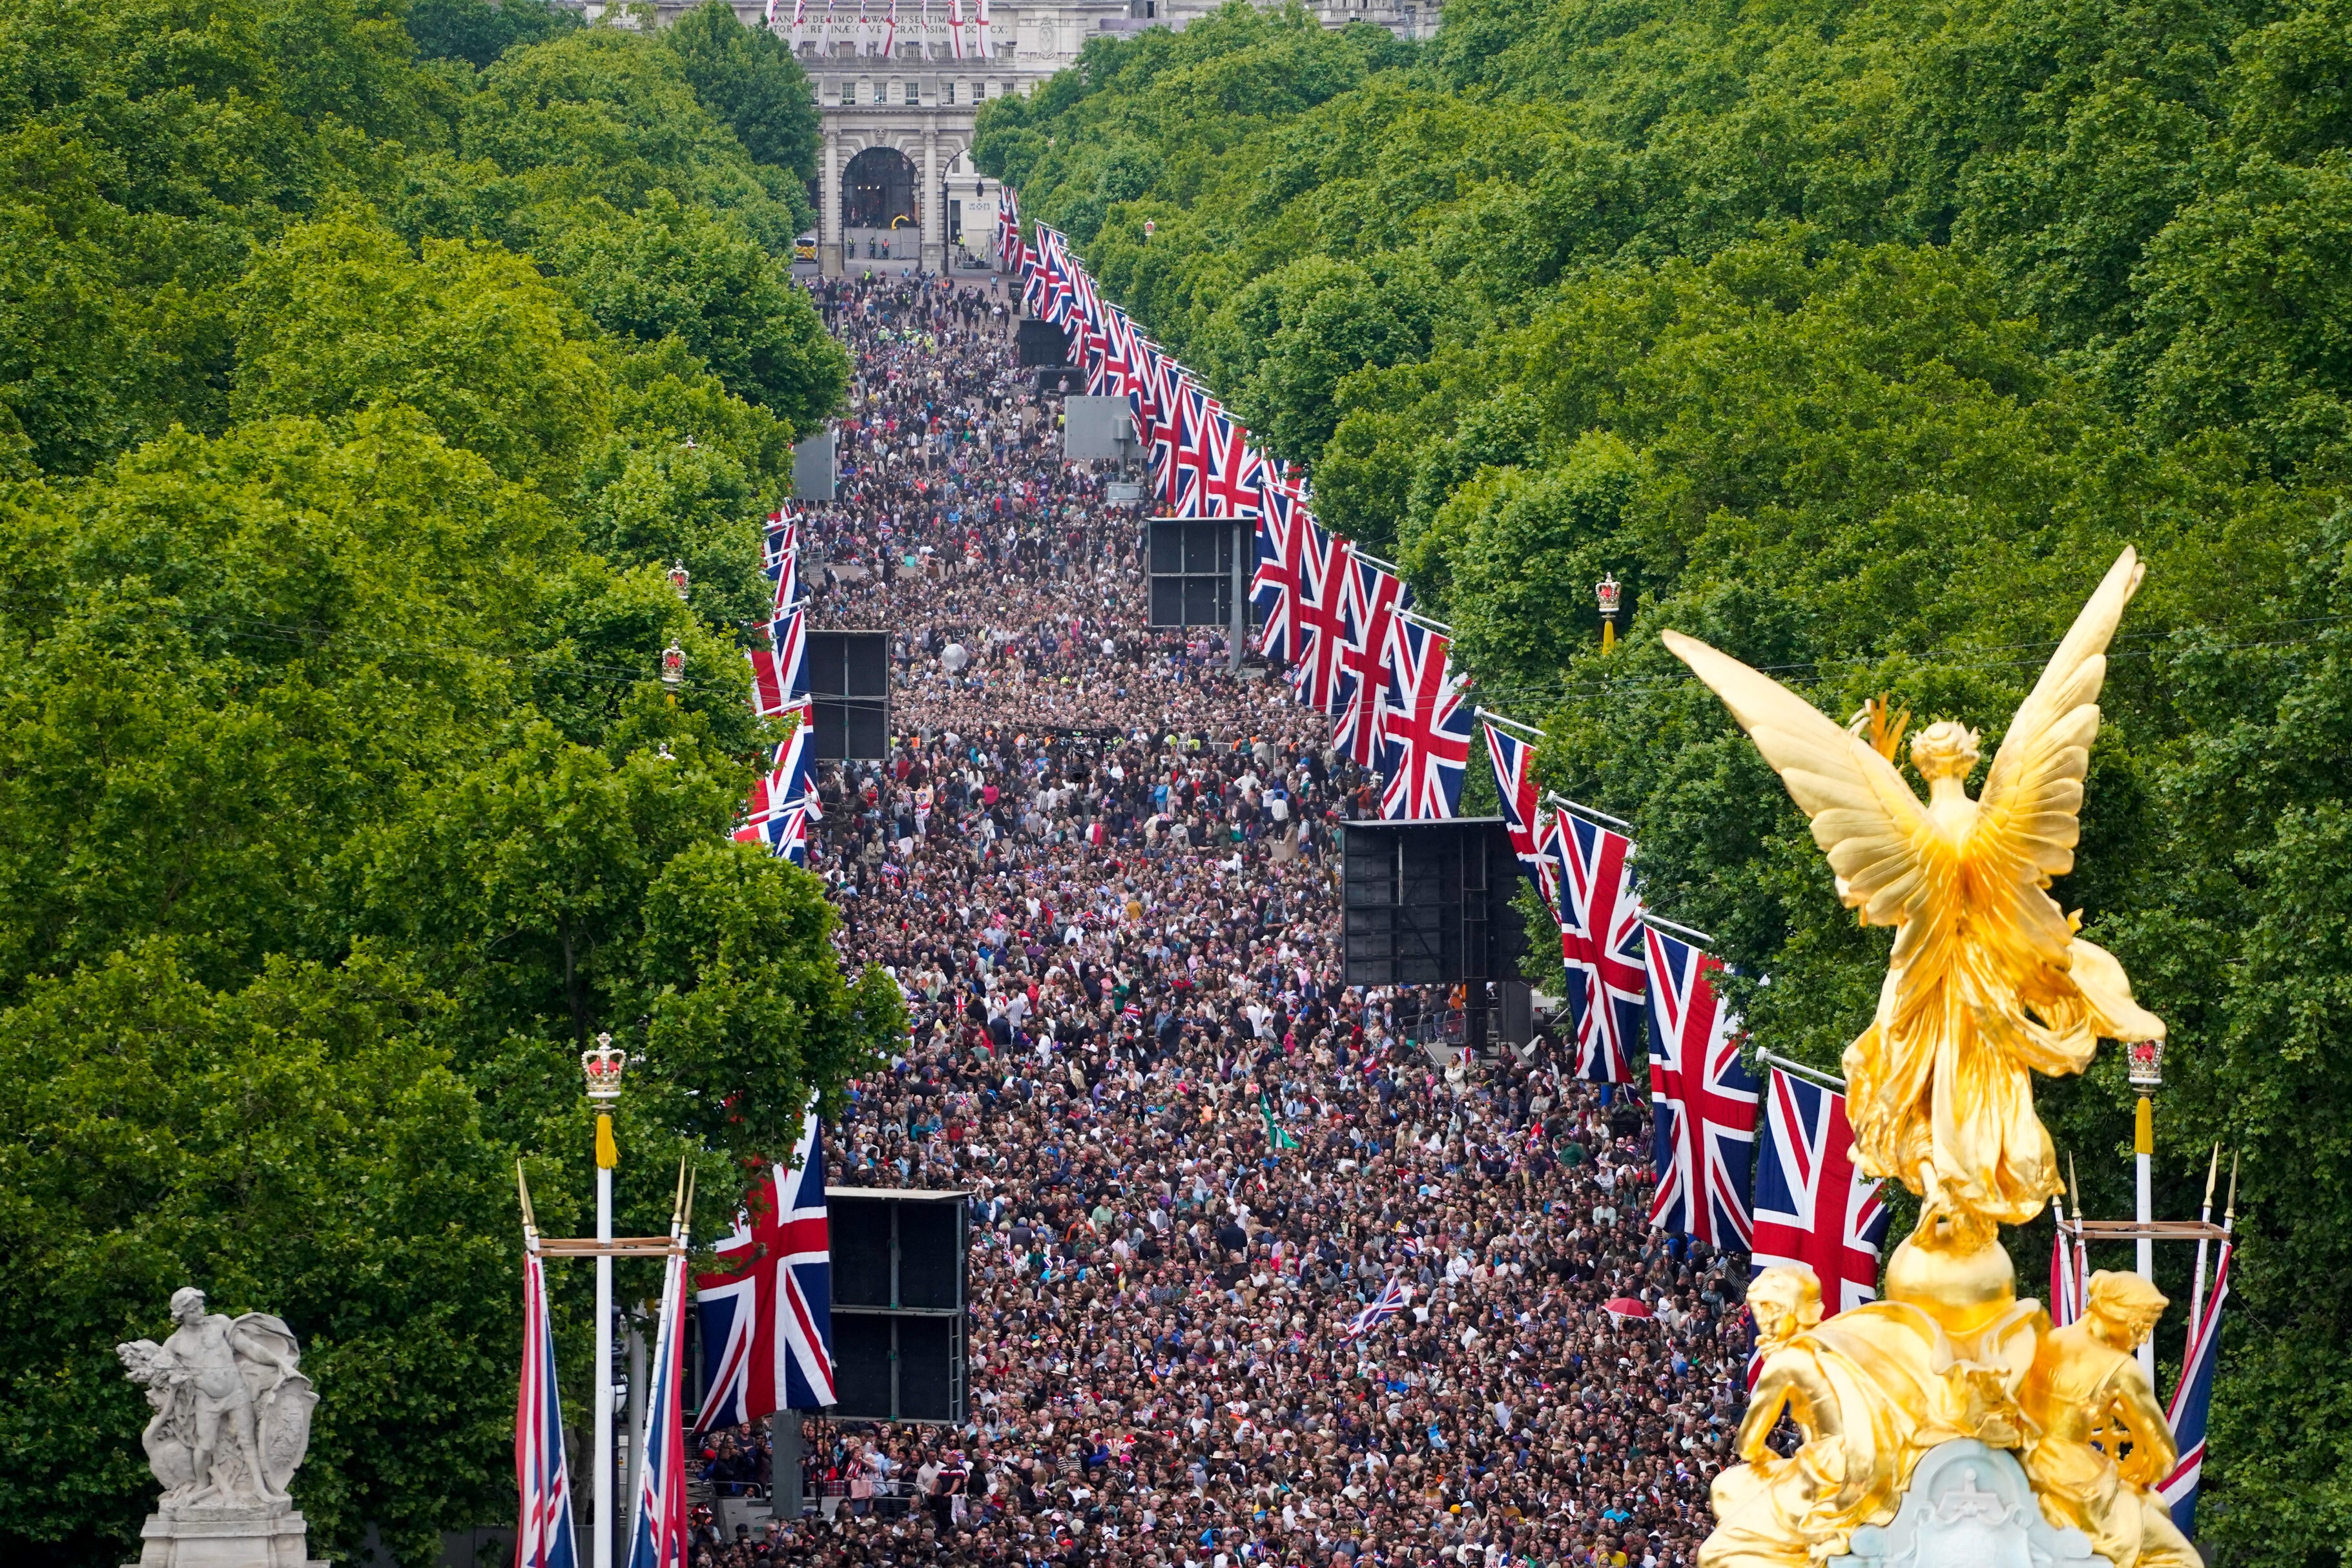 Thousands of Britons attended the Platinum Gala at Buckingham Palace on June 4, 2022 as part of Queen Elizabeth II's platinum jubilee celebrations (Photo by Niklas Hallen/AFP)